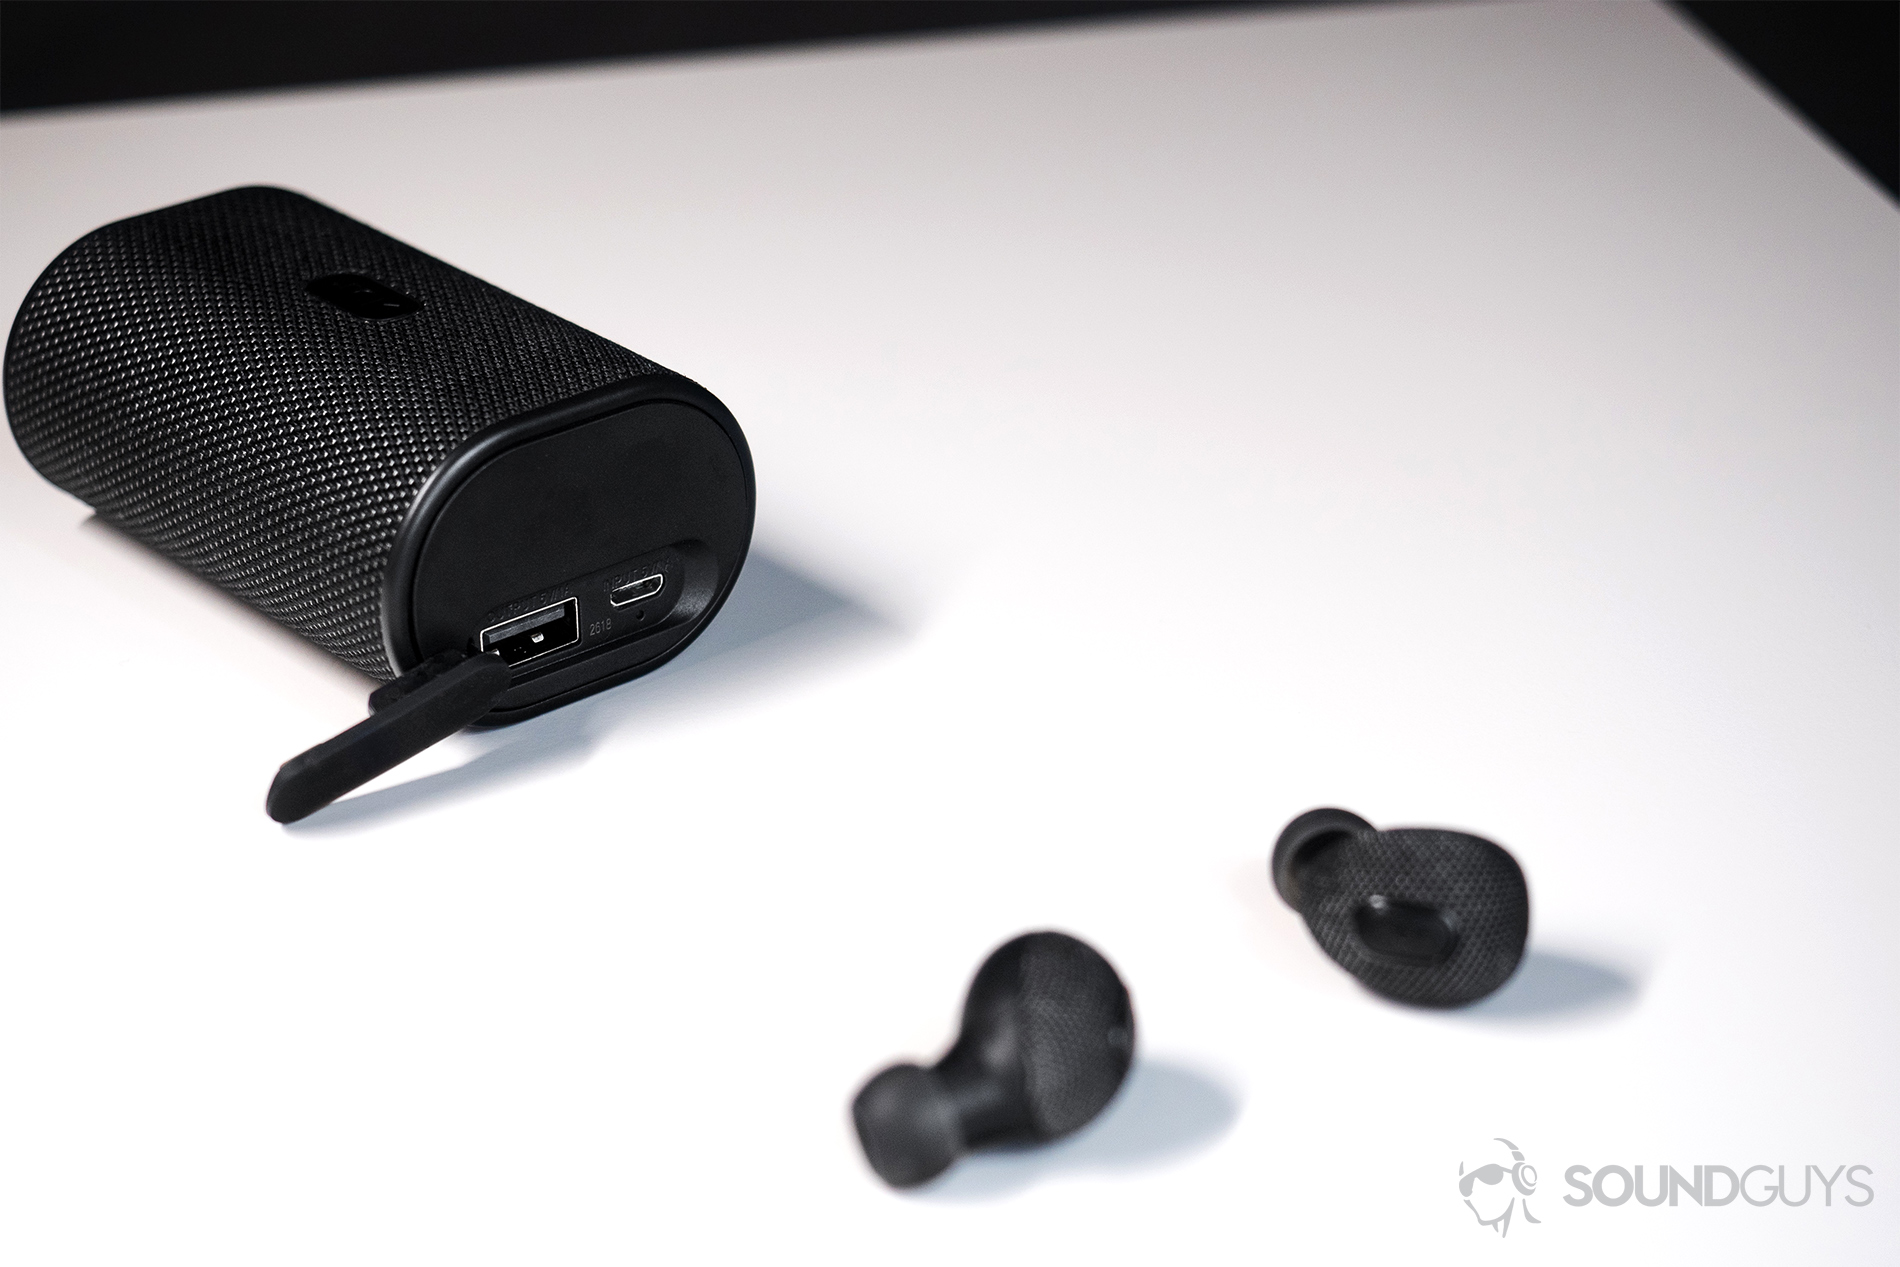 Jam Live True: The earbuds laid out in front of the case.